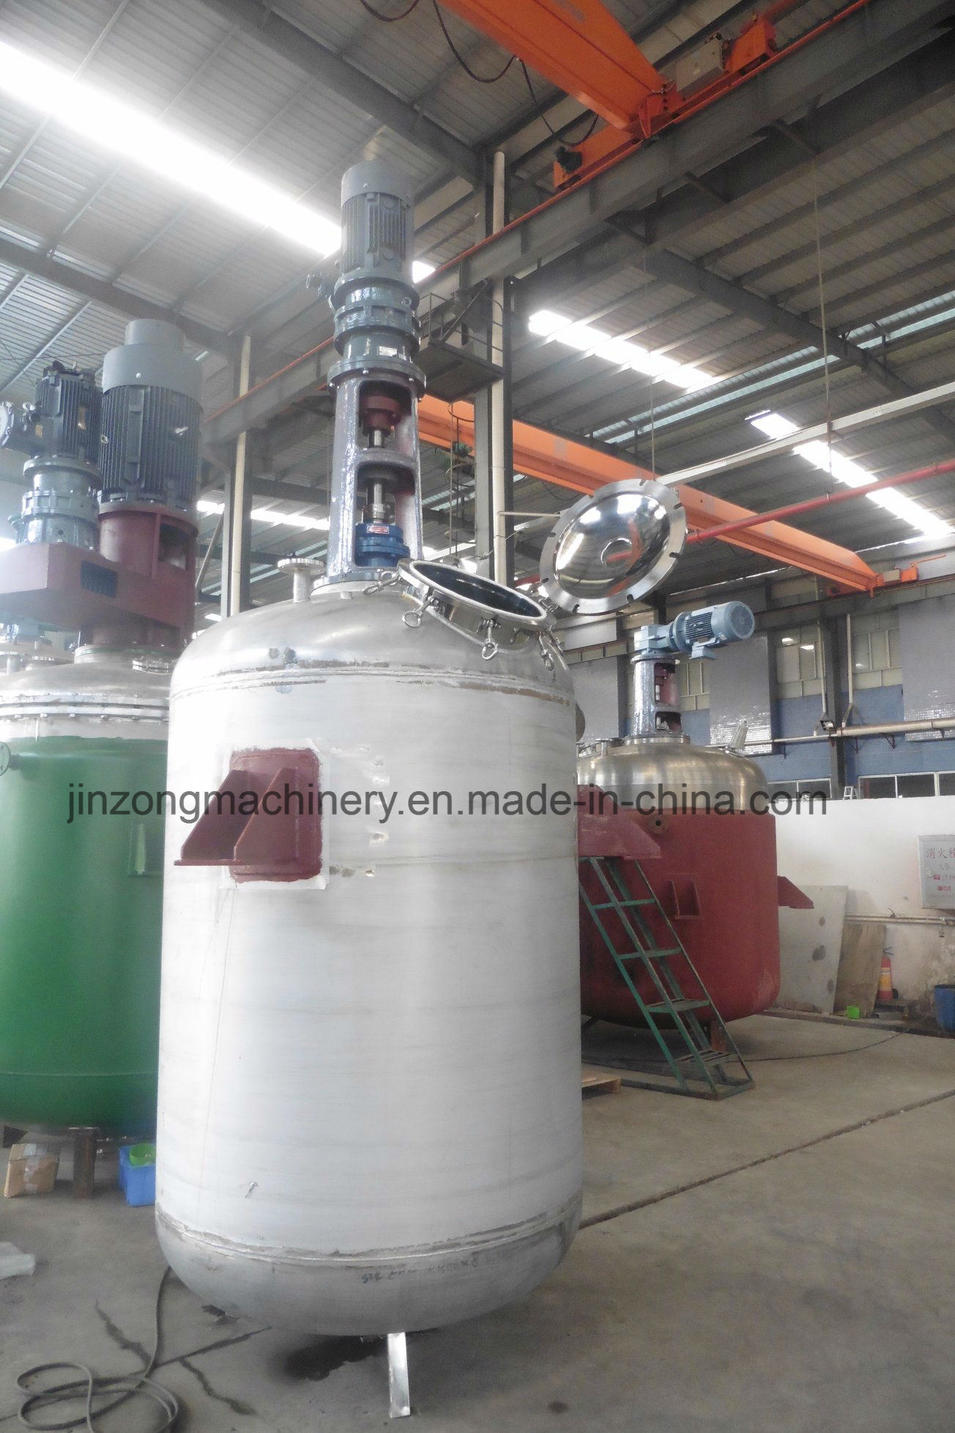 2000L Chemical Reactor with Jacket Heating/Cooling